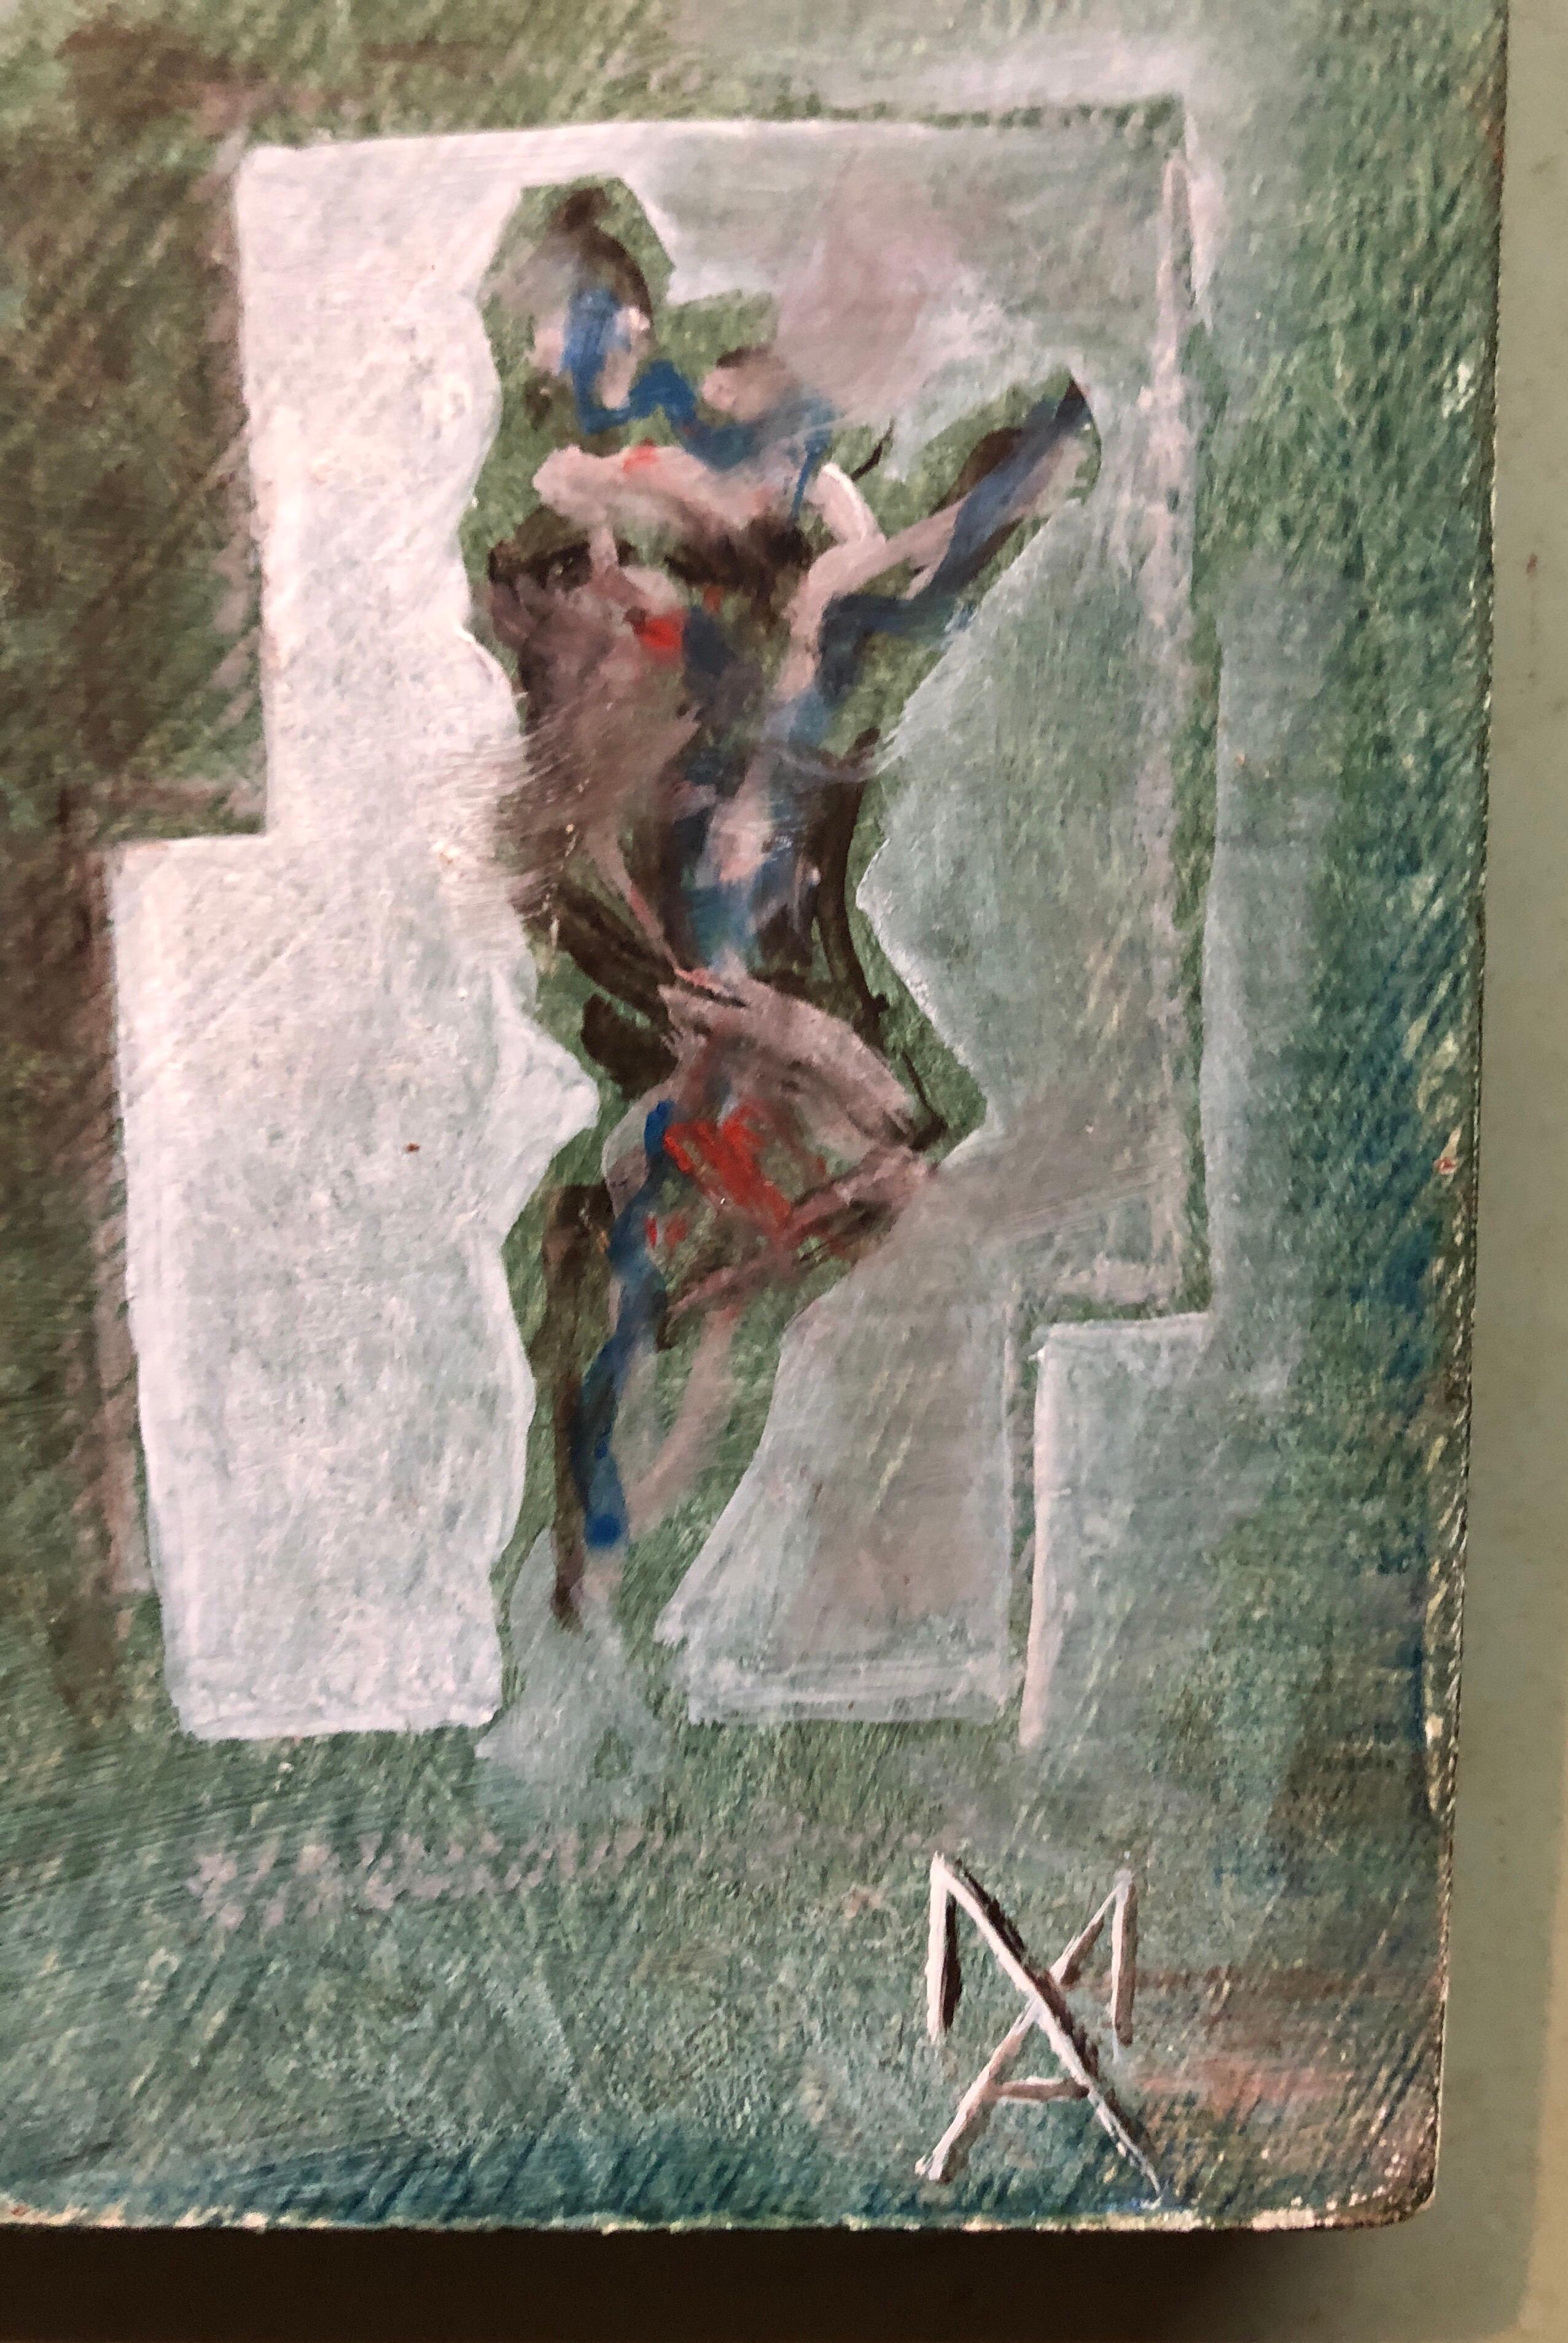 Figurative Abstraction gestural painting. Matthias Alfen’s series of Janus figures are an innovation in figural art predicated on the advances made by the Futurist sculptor and painter Umberto Boccioni and the Modernist Alberto Giacometti. The